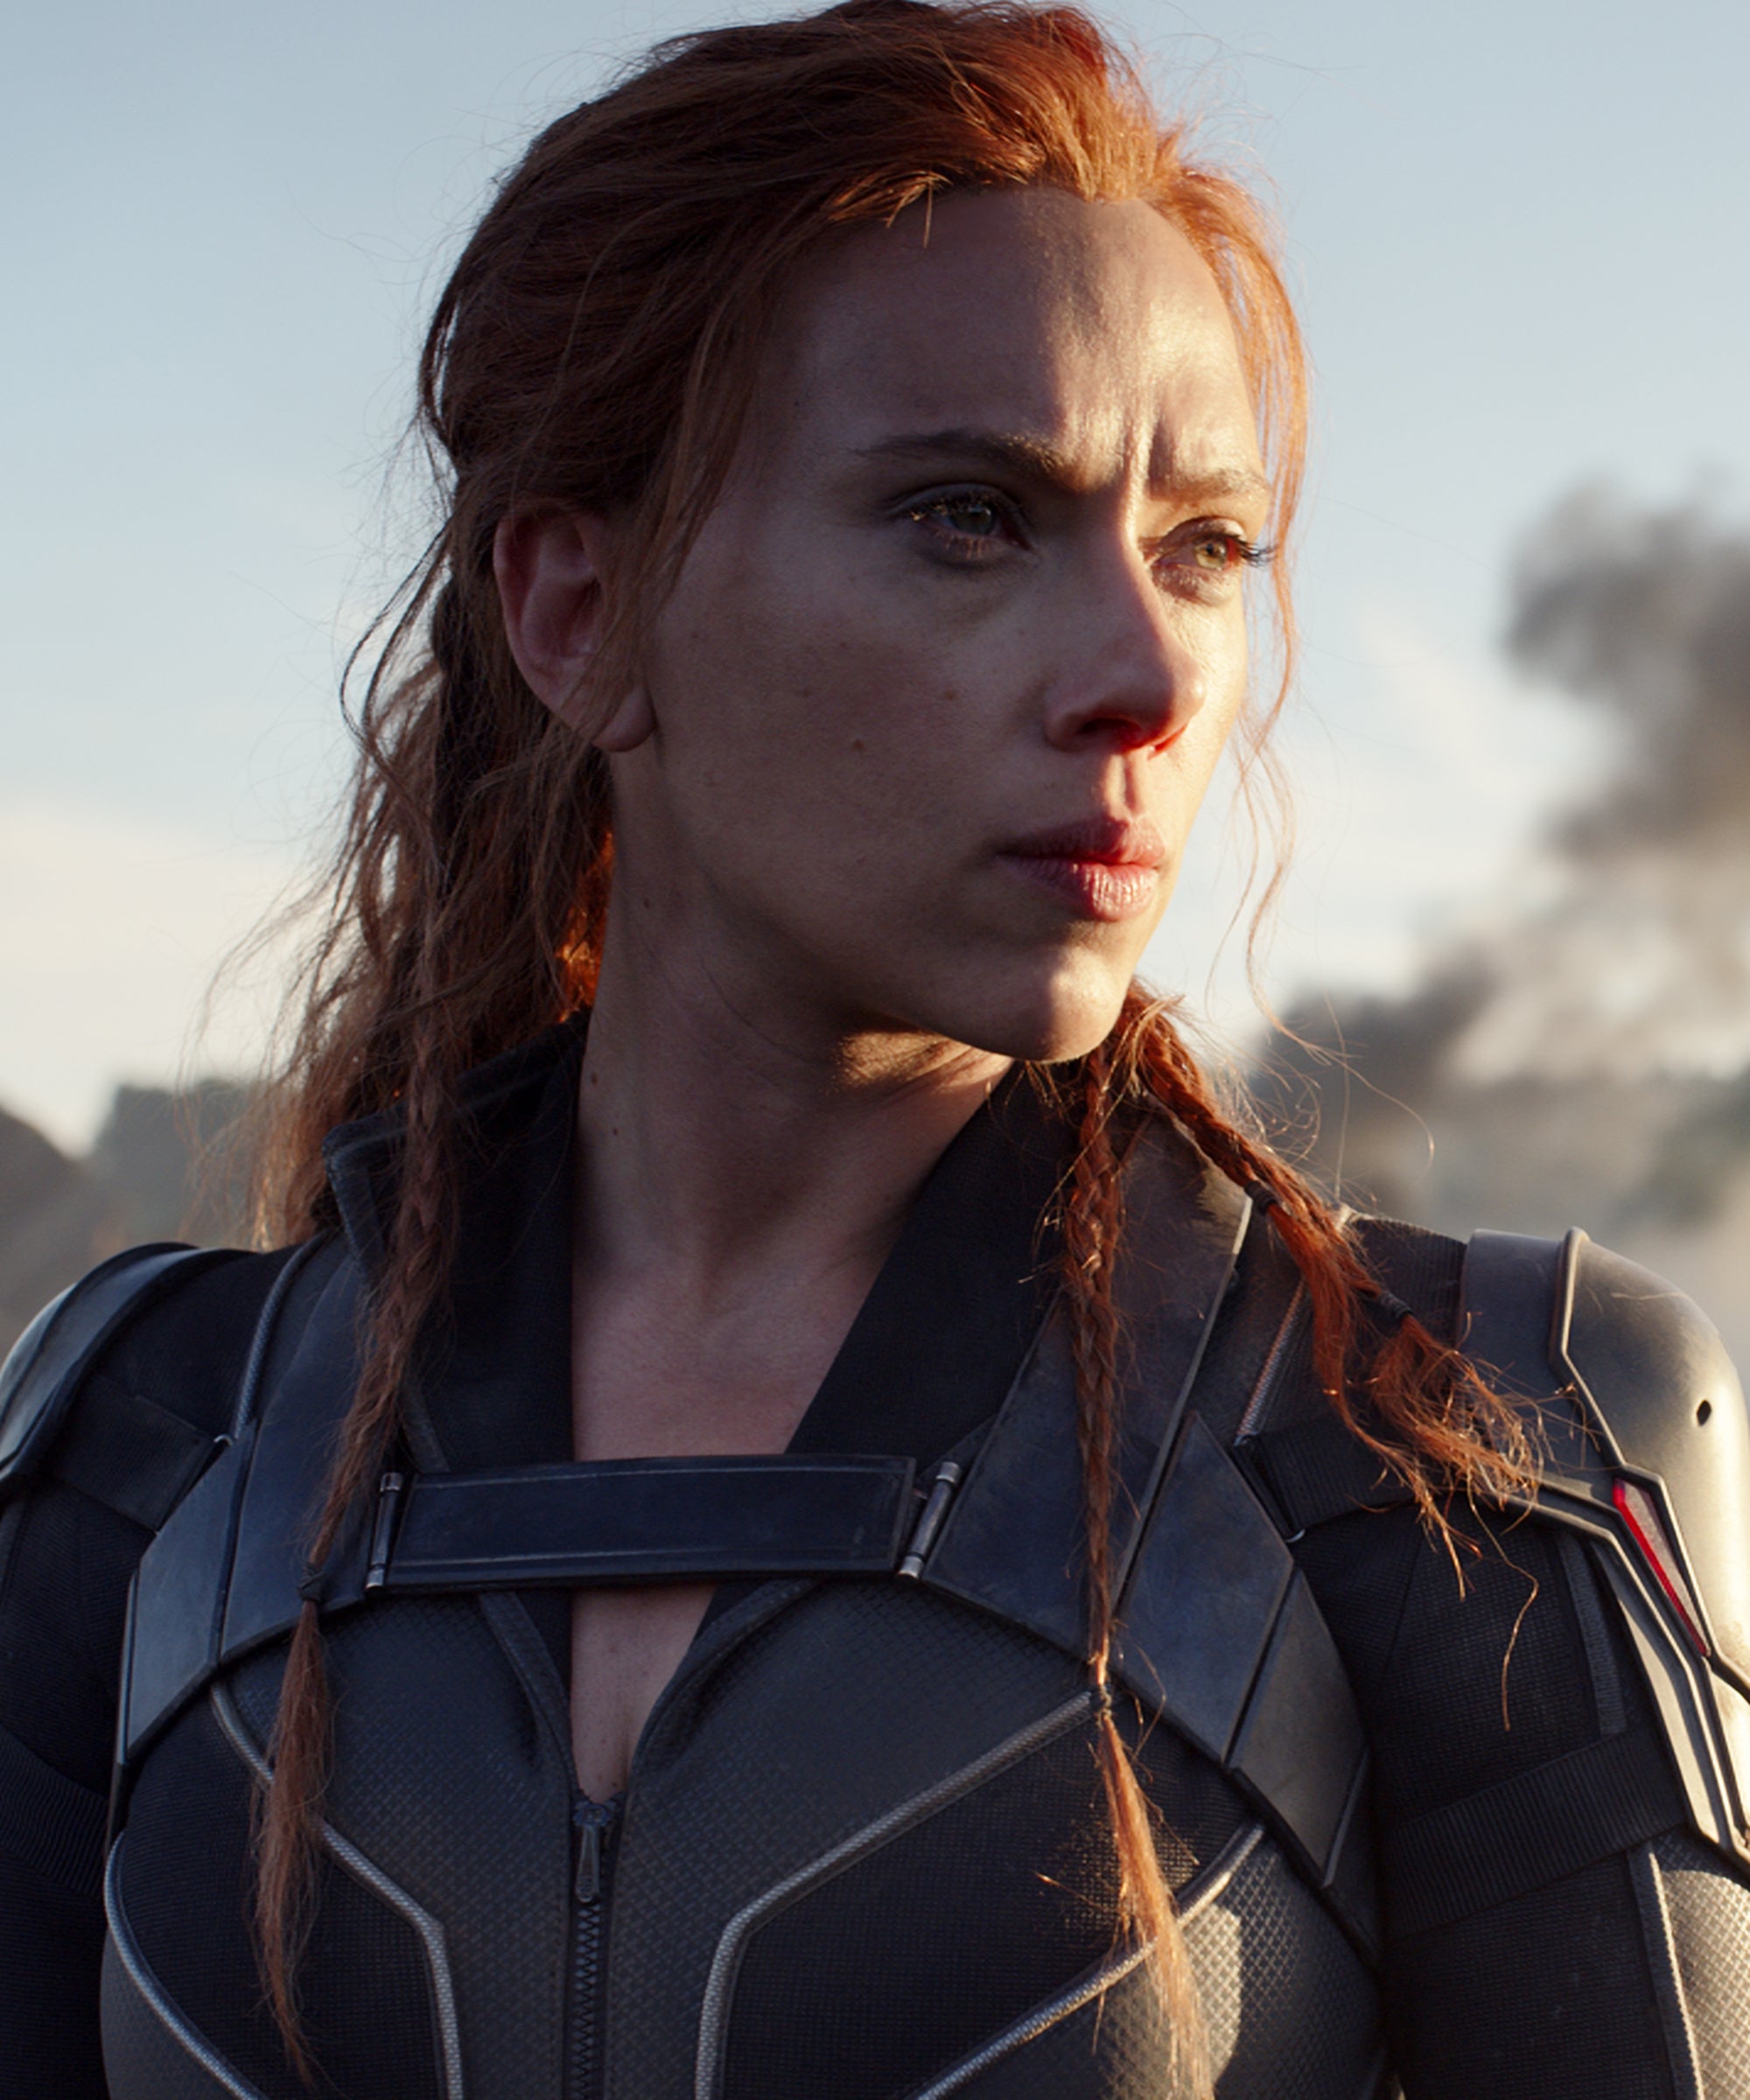 Black Widow Movie Characters From Comics And Cast List